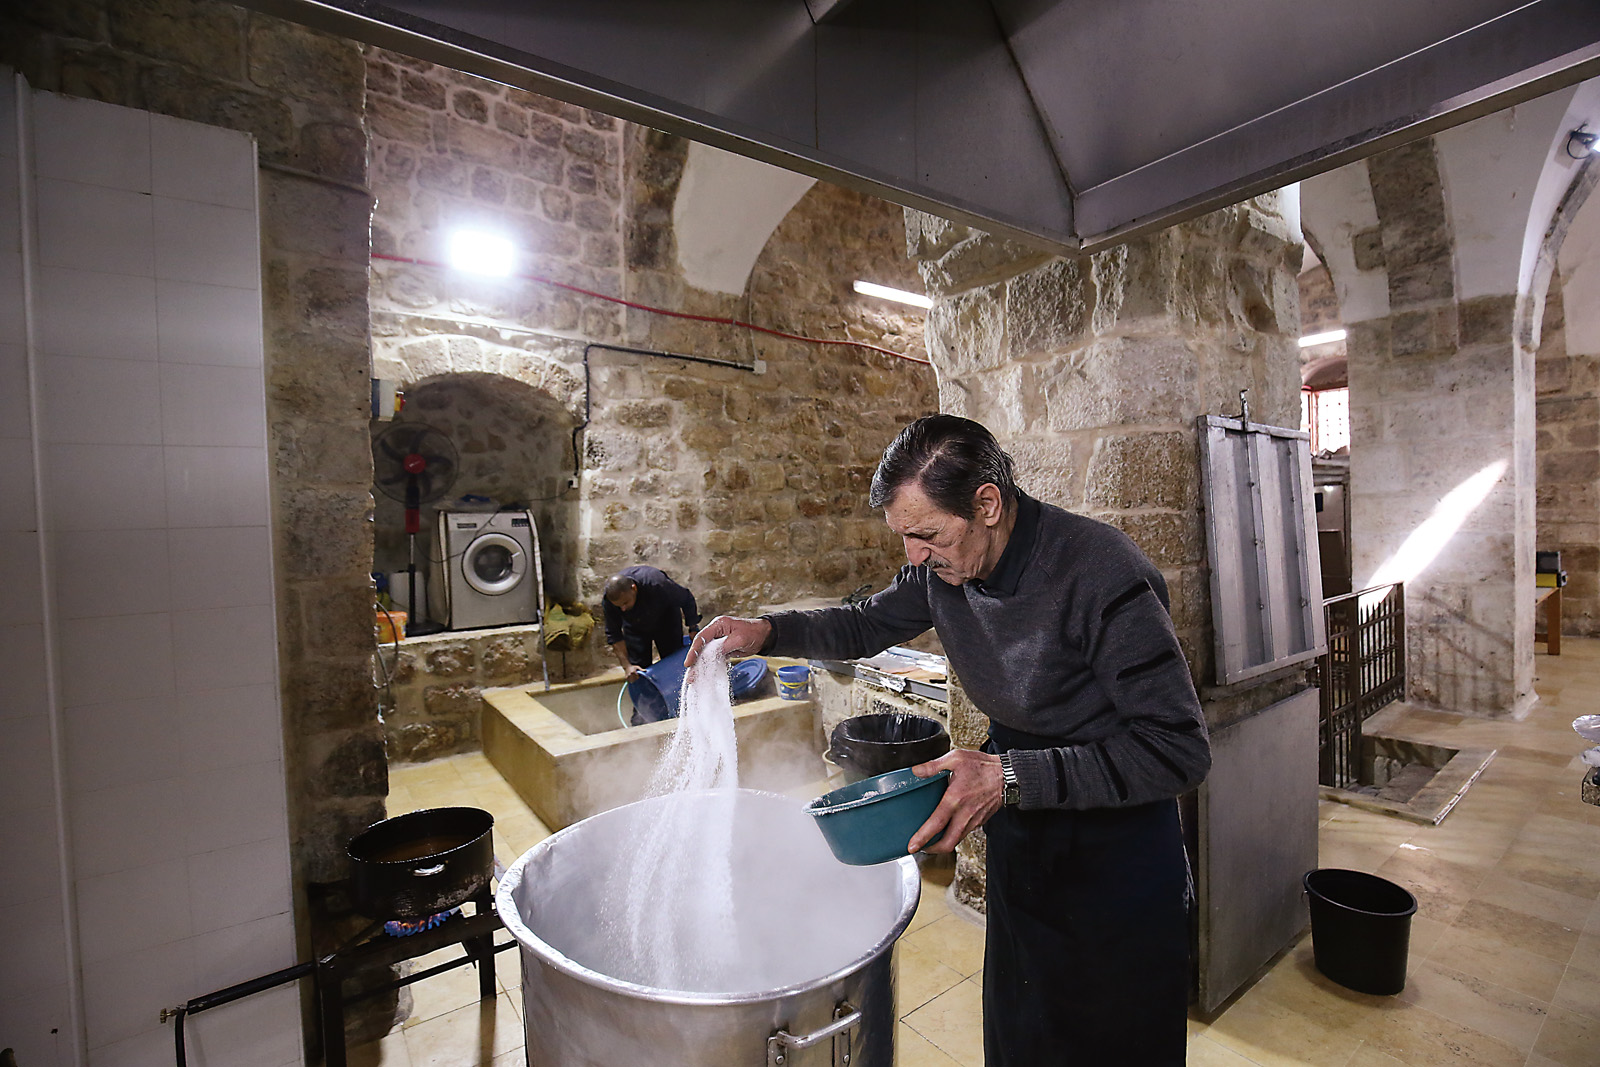 Head cook Samir Jaber prepares the day’s soup beginning at 6 a.m. On this day, it’s yakhni bazela, pea stew. Most recipes take three to four hours to prepare and require 50 to 70 kilograms of varying combinations of rice, vegetables, mutton, and beef or chicken.